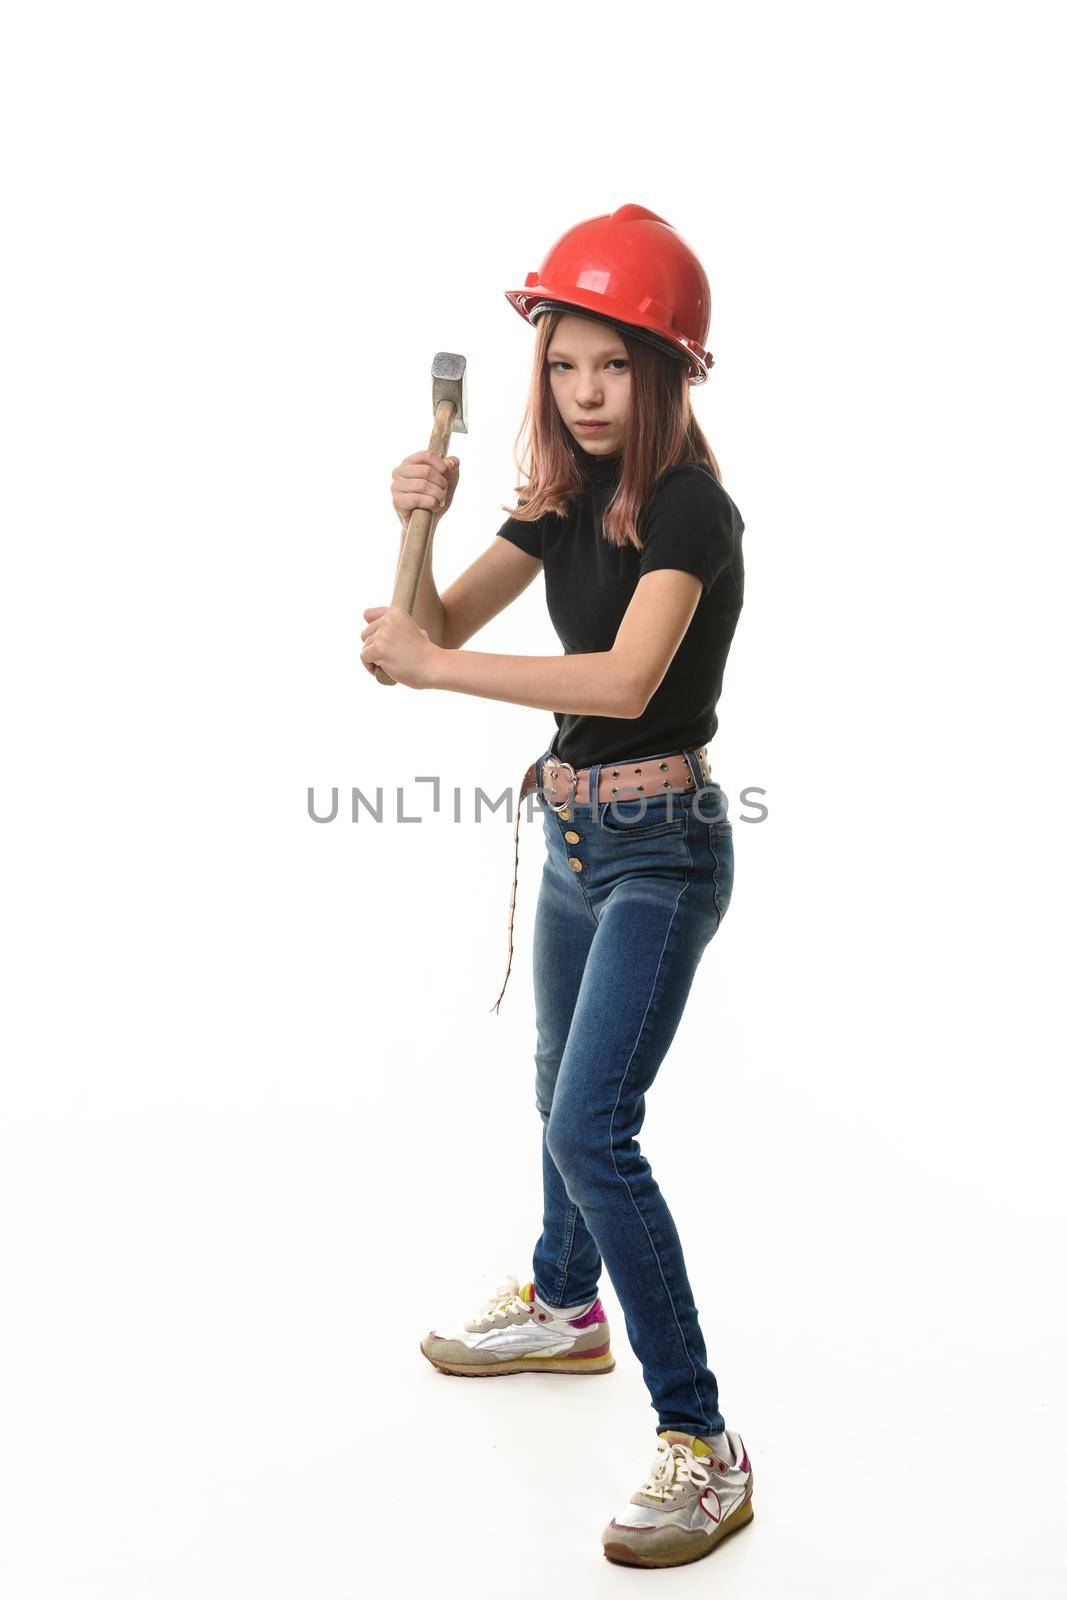 A girl in a hard hat is preparing to hit with a hammer, isolated on a white background